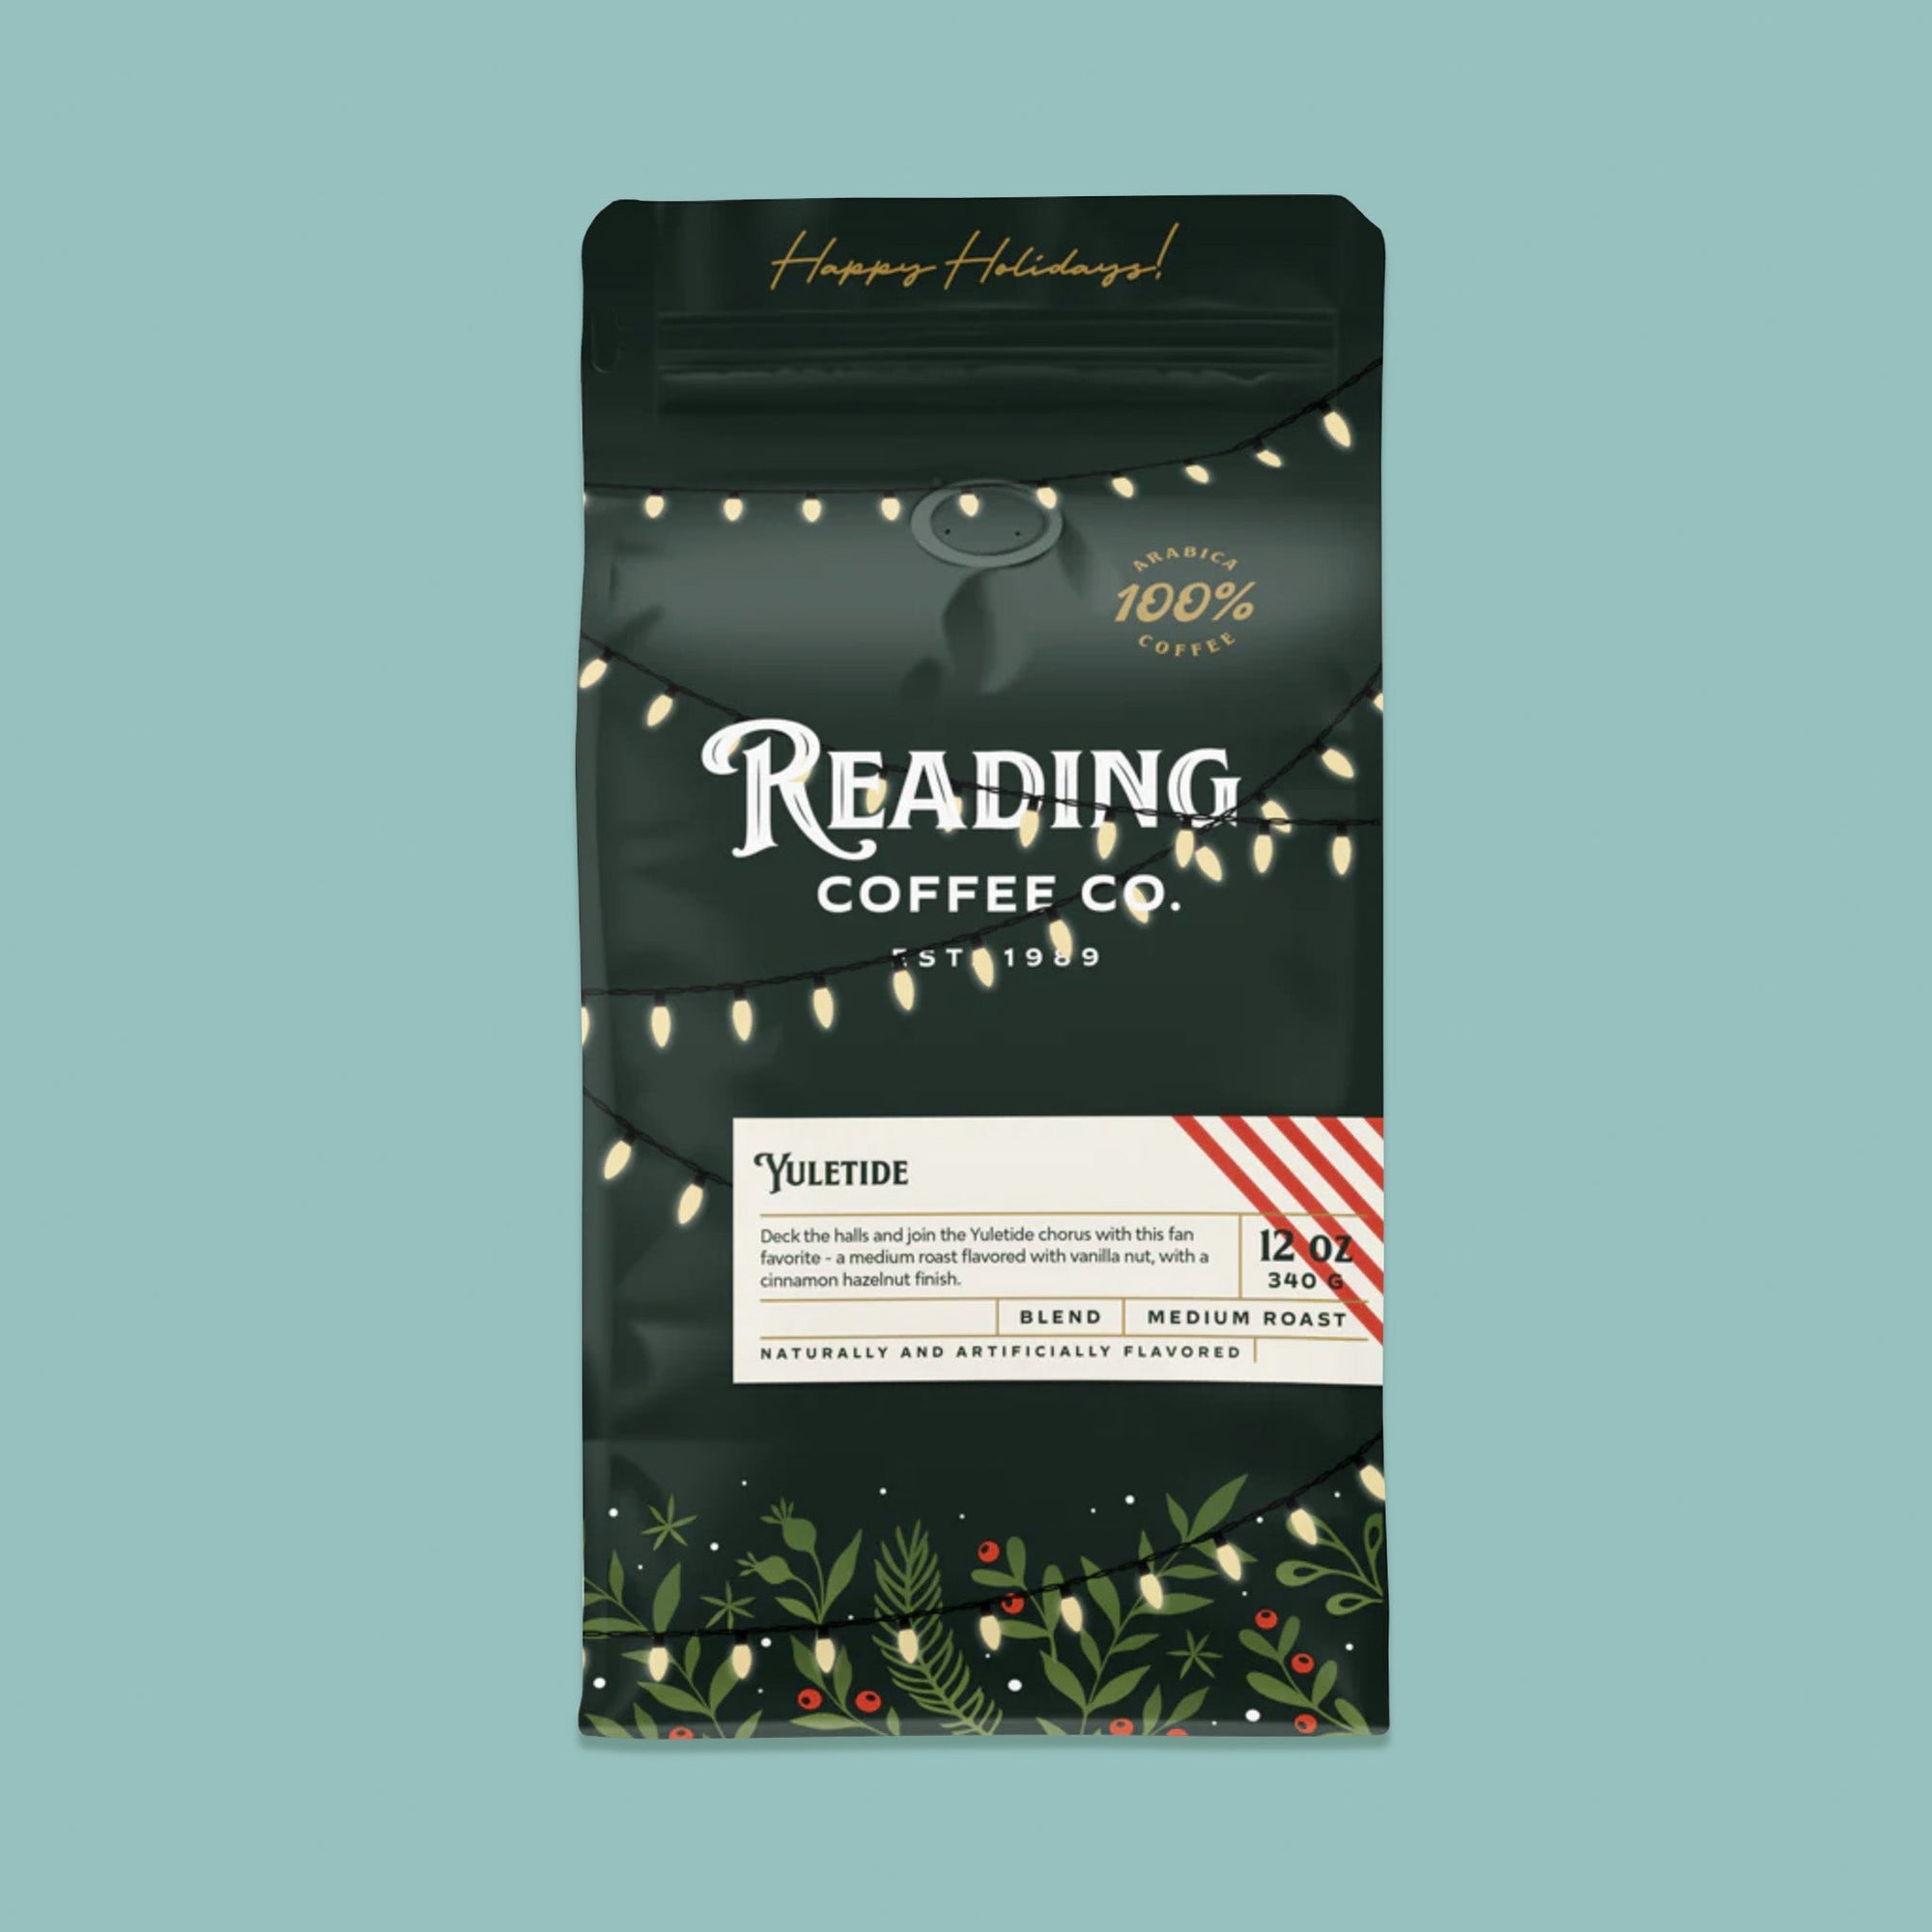 On a sage green background sits a dark green package of coffee. This package is gold, white, and dark green lettering. There are swags of lights and greenery with berries. It says "Happy Holidays!", "Reading Coffee Co. Est. 1989", "Yuletide Blend Medium Roast." It is '100% Arabica Coffee. It also says "Deck the halls and join the Yuletide chorus with this fan favorite - a medium roast flavored with vanilla nut, with a cinnamon hazelnut finish." 12 oz 340g